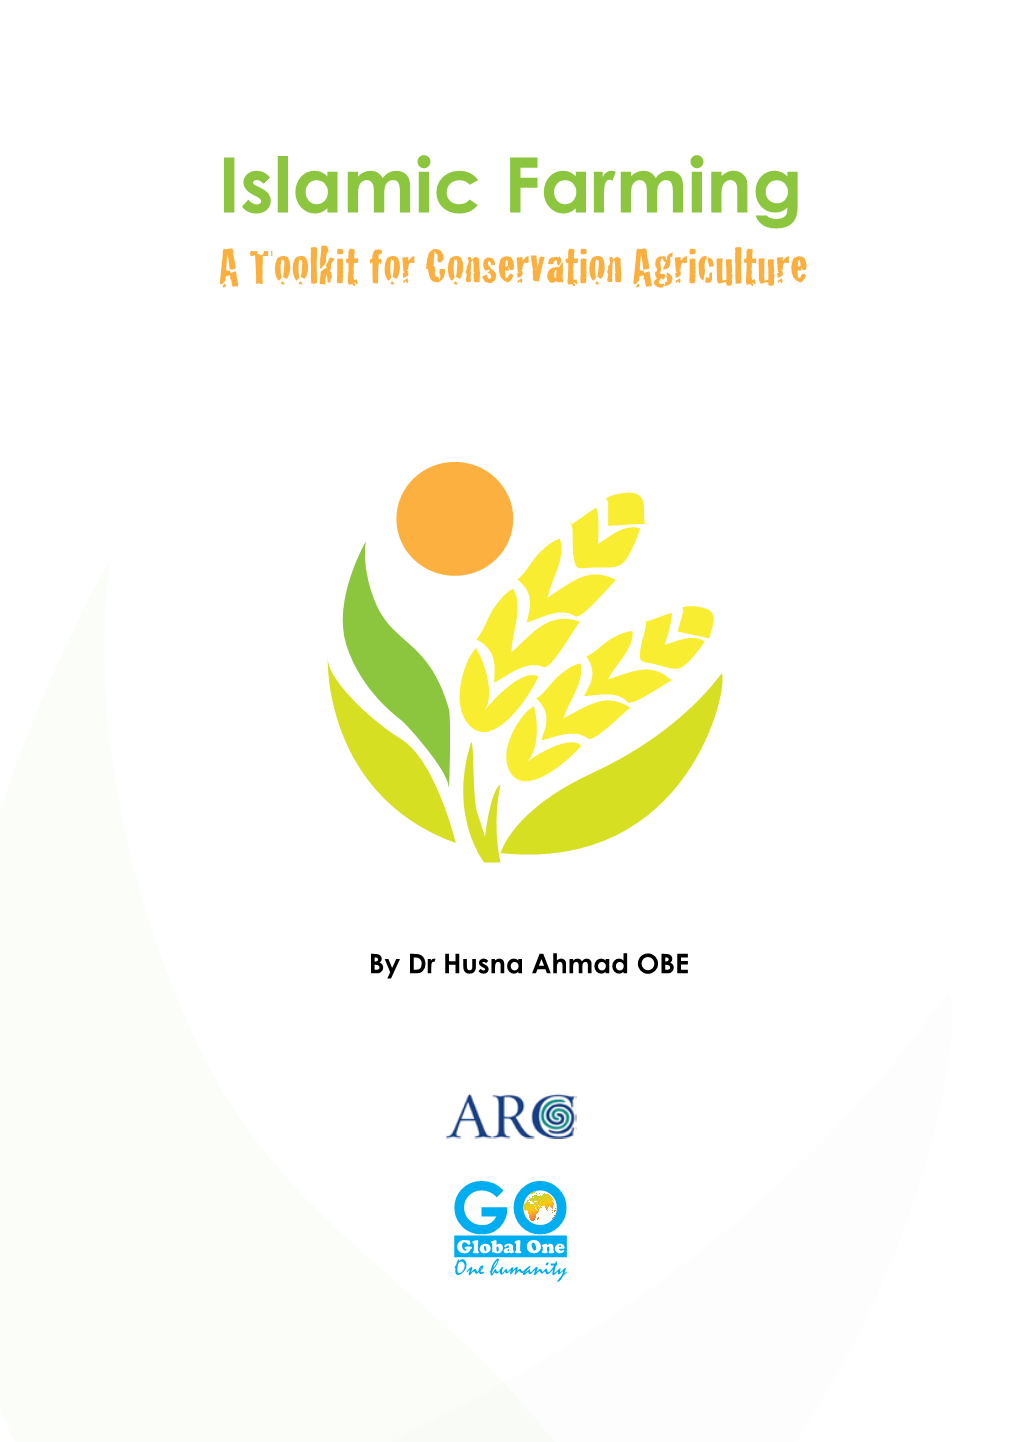 Islamic Farming a Toolkit for Conservation Agriculture